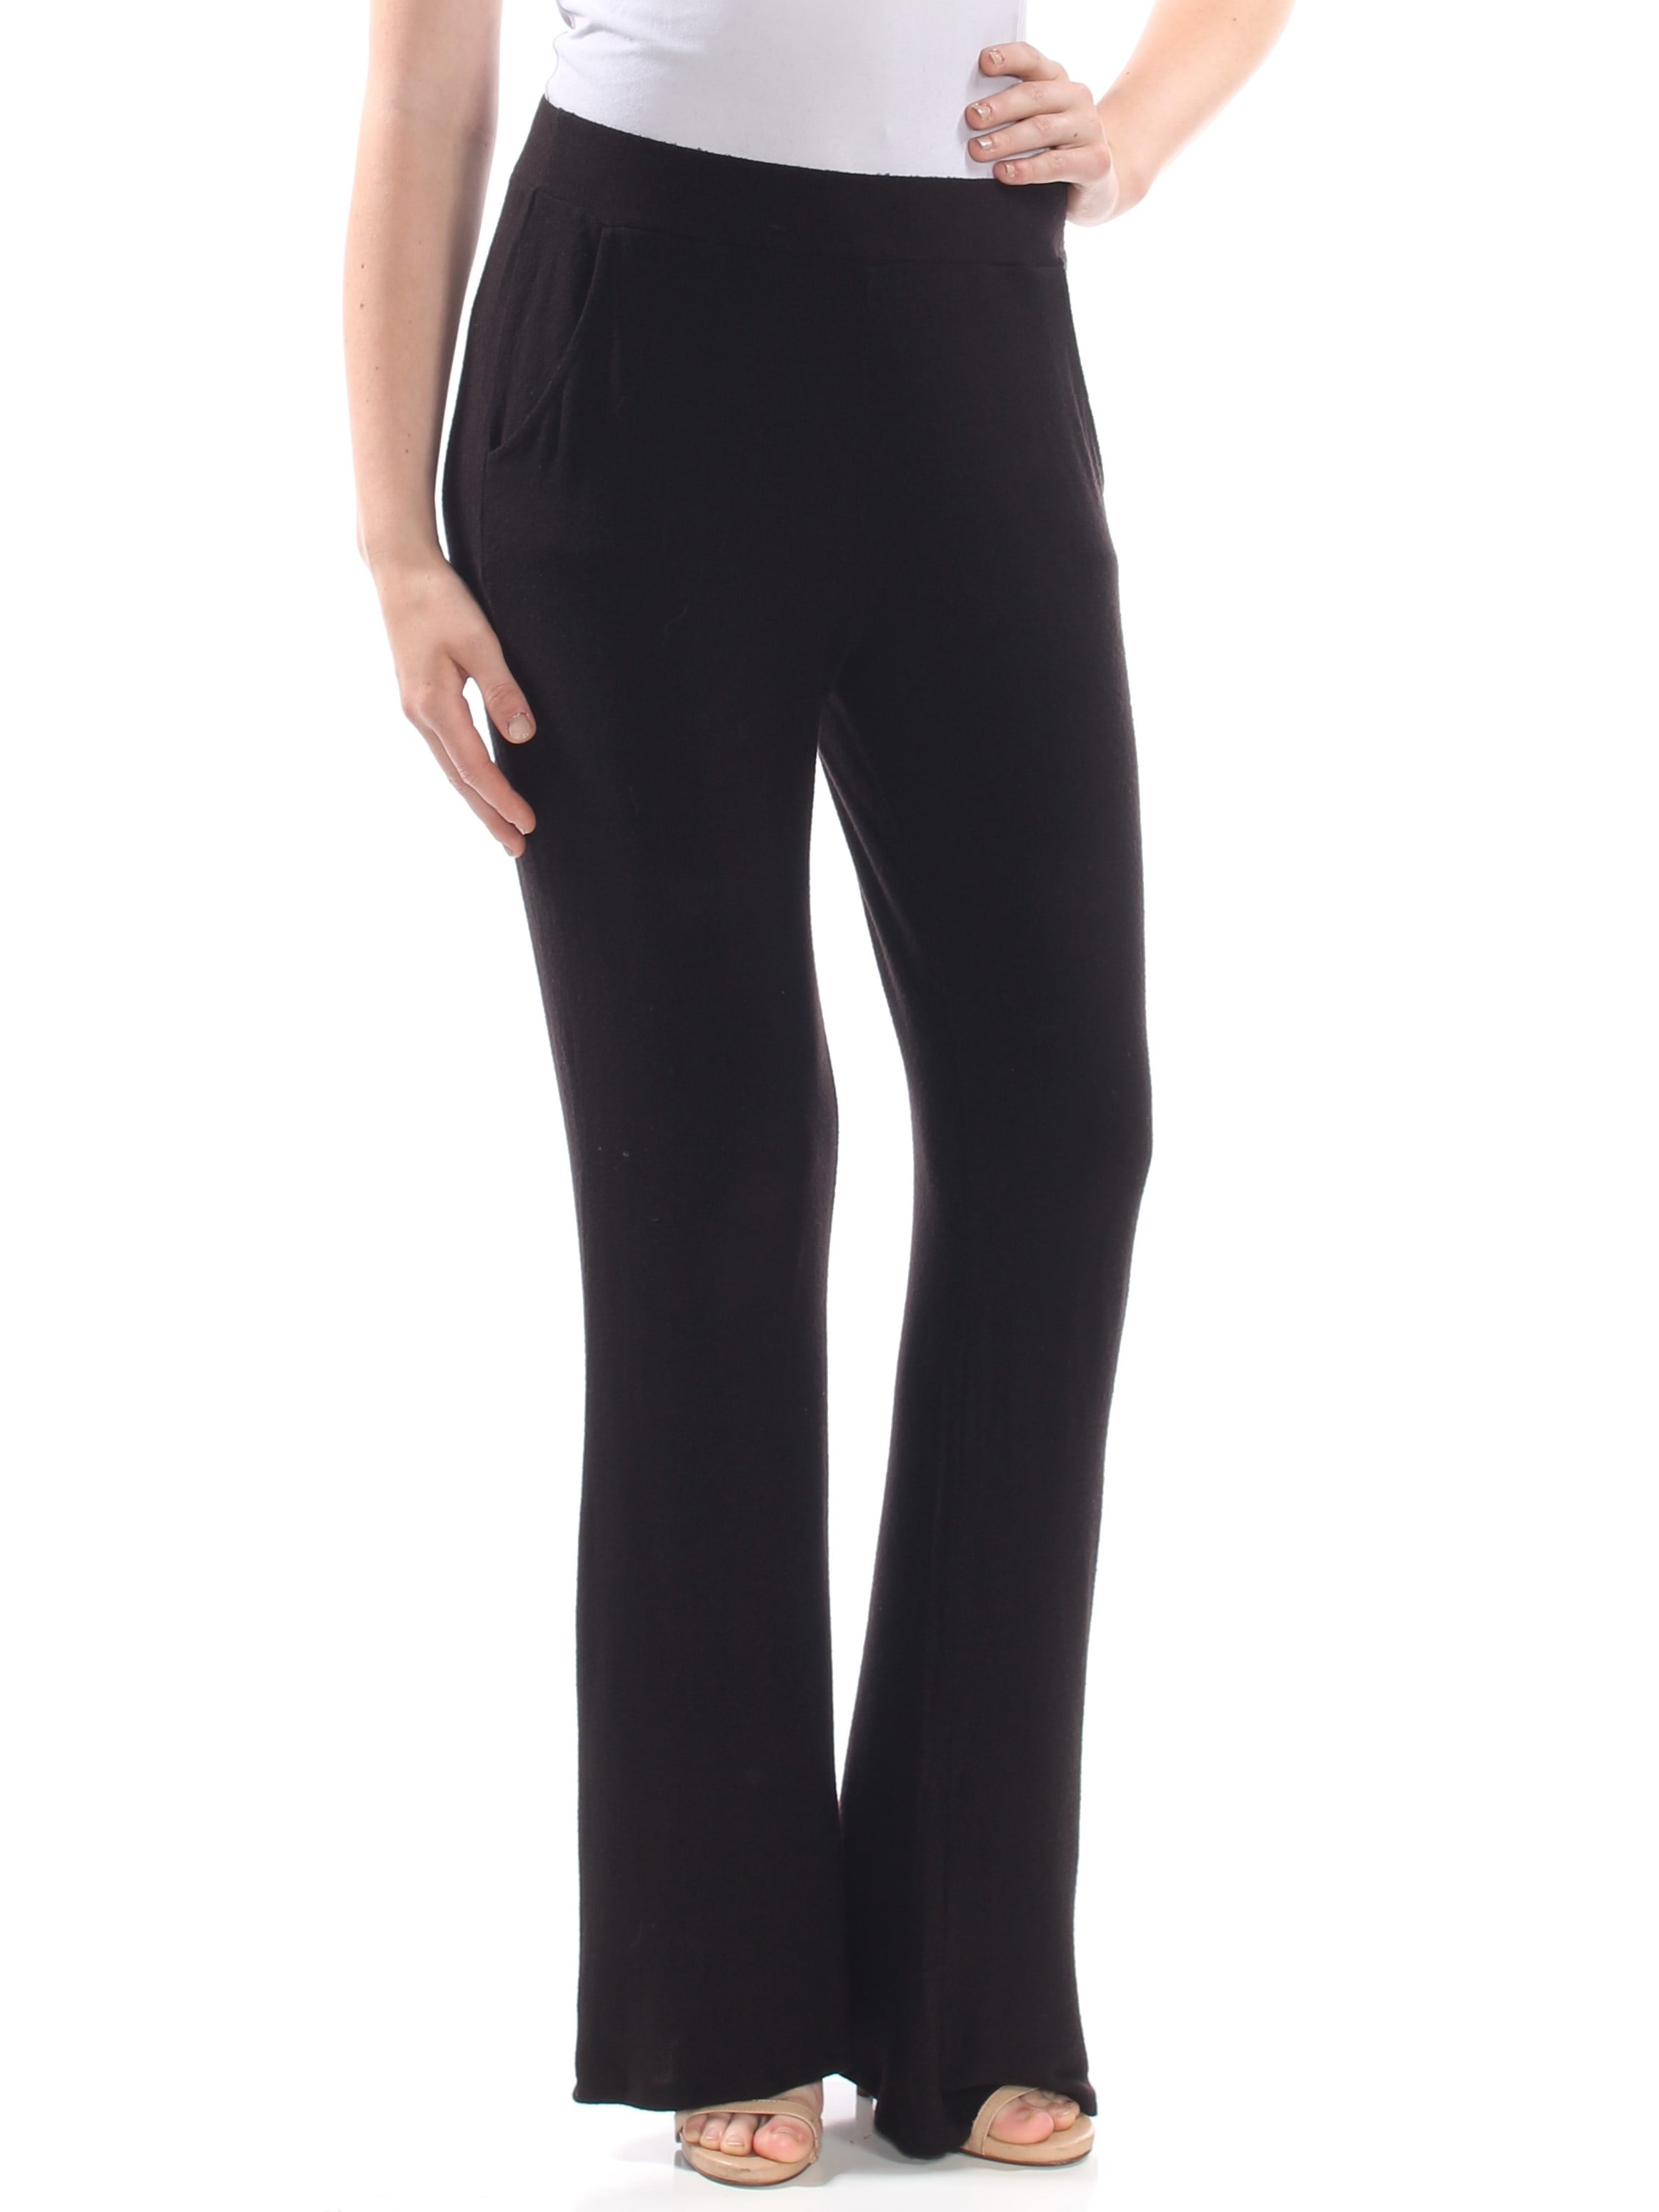 GUESS - GUESS Womens Black Pocketed Flare Active Wear Pants Size M ...